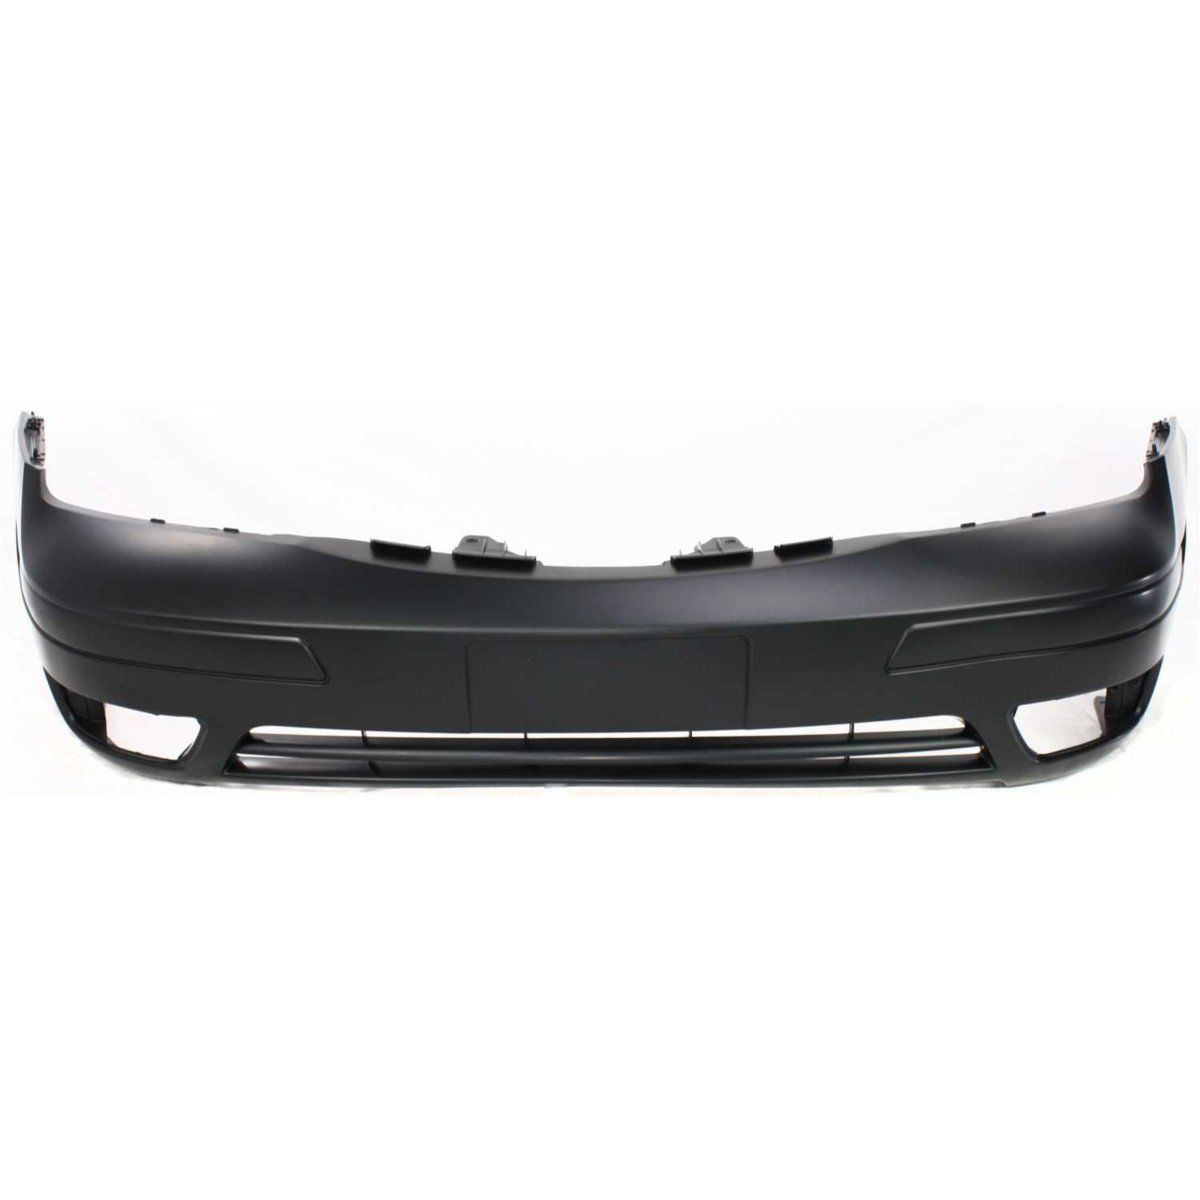 2005-2007 FORD FOCUS Front Bumper Cover w/o Appearance Pkg  w/o Fog Lamp Holes Cut Out Painted to Match